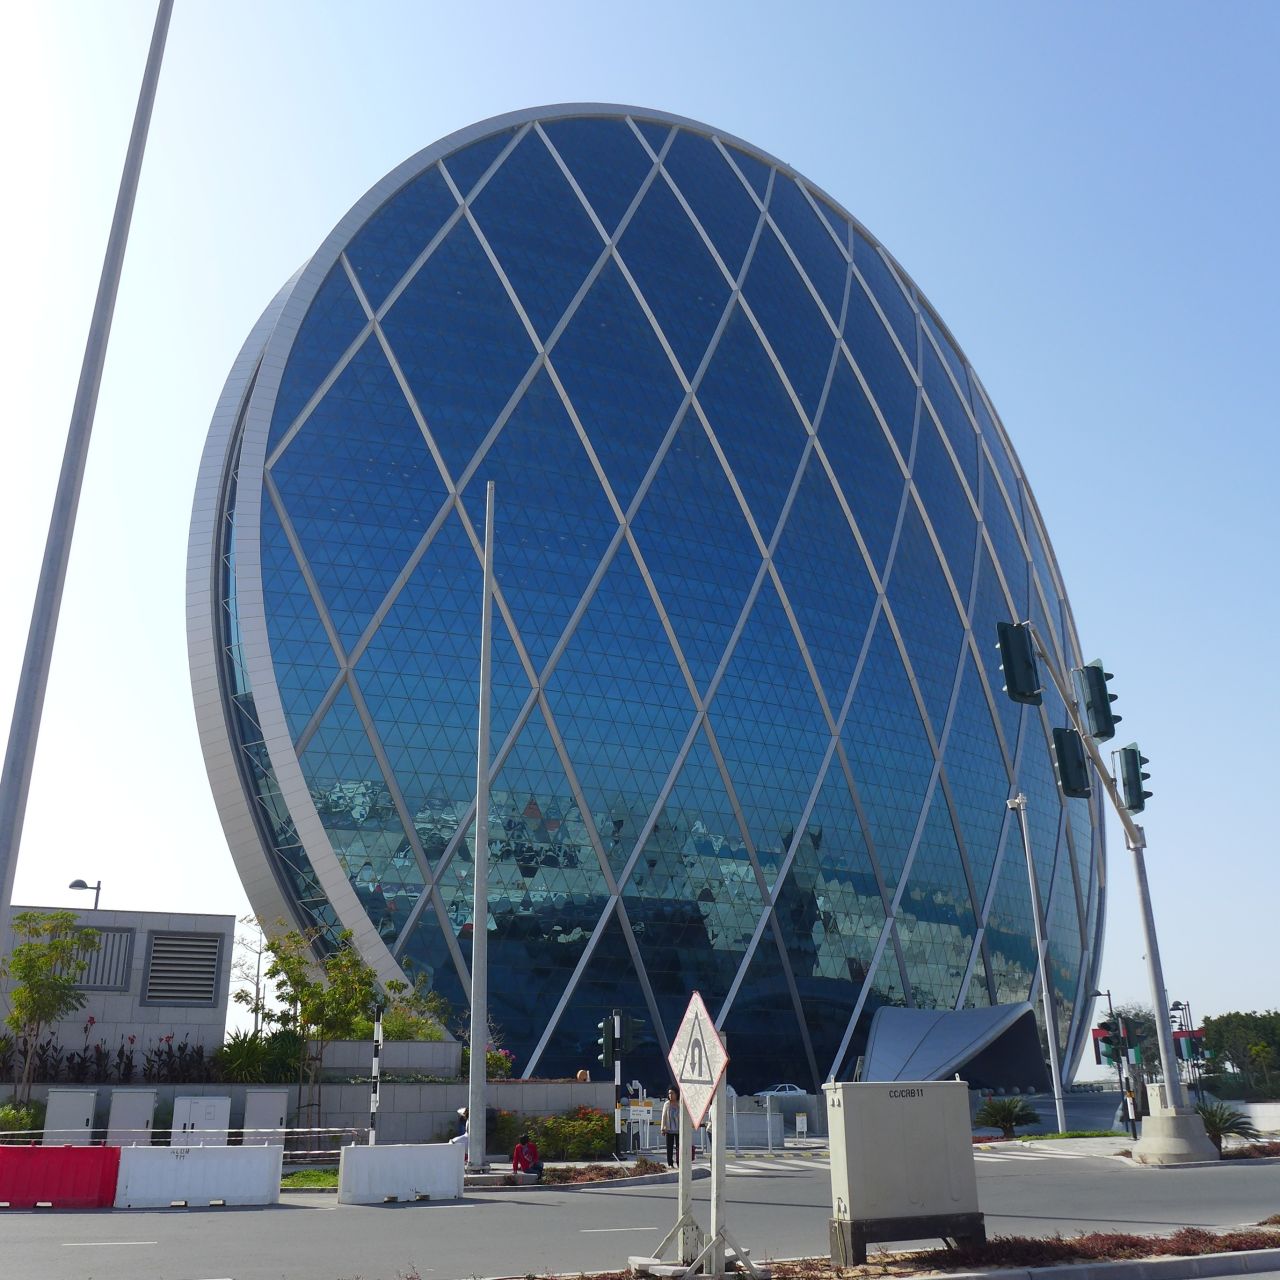 Completed in 2010 in Al Raha Beach, United Arab Emirates, the <a href="http://www.aldar.com/en/project/projects/hq-1" target="_blank" target="_blank">Aldar Headquarters building</a> resembles a glass-covered wheel. The 23-story office space follows LEED standards for environmentally exceptional buildings. It has has become a city landmark, says <a href="http://ireport.cnn.com/docs/DOC-1123294">Devi Trianna</a>, who predicts the cities of the future will be more environmentally friendly. 